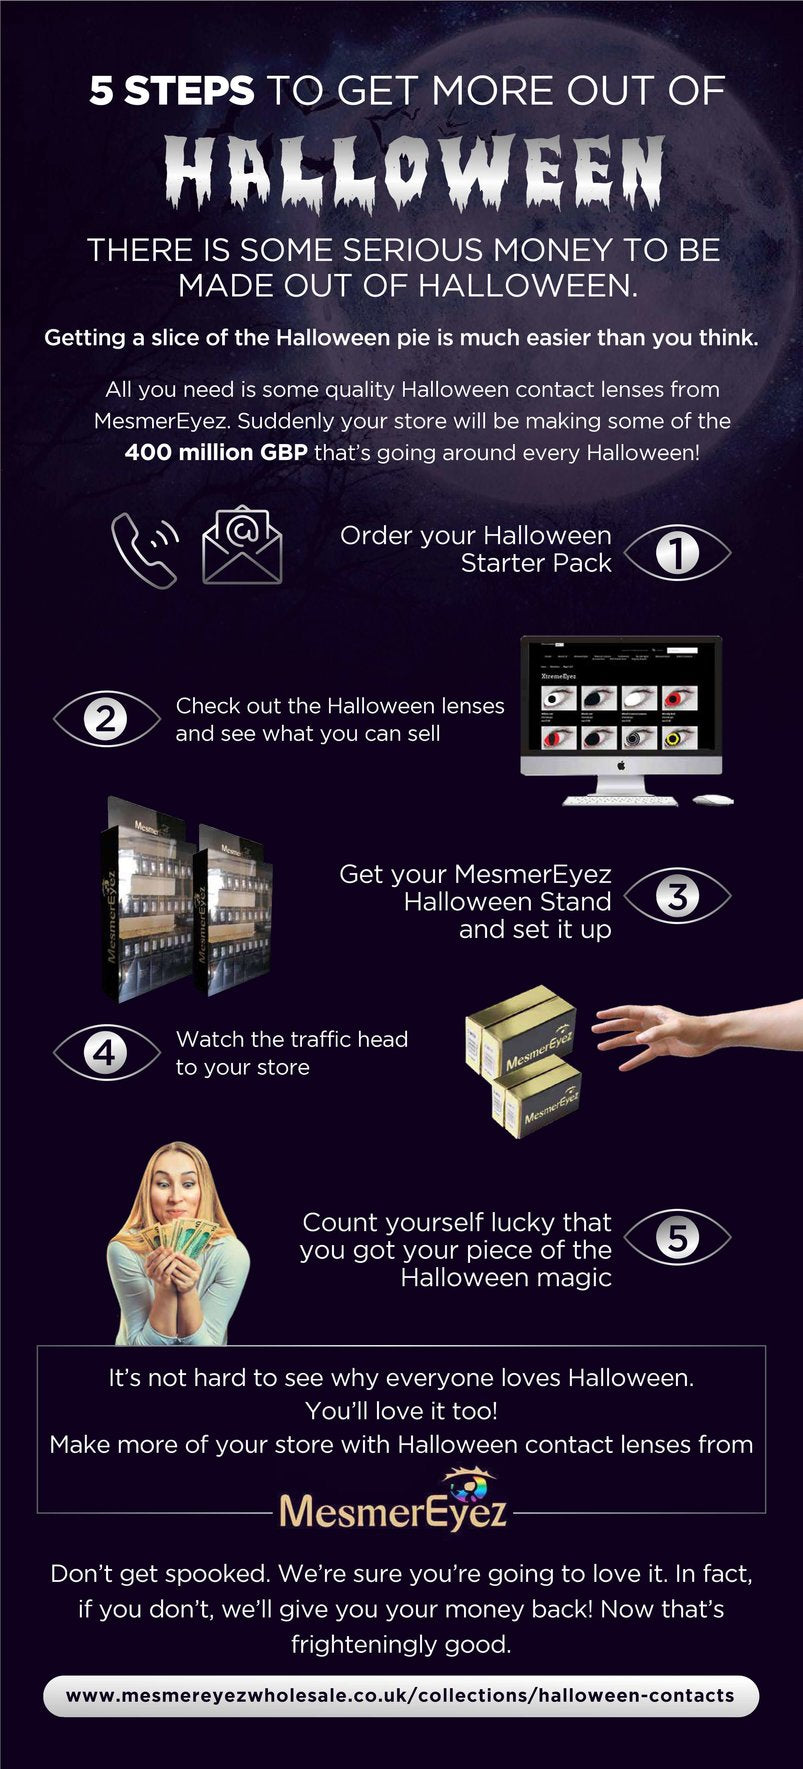 5 Steps To Get More Out Of Halloween